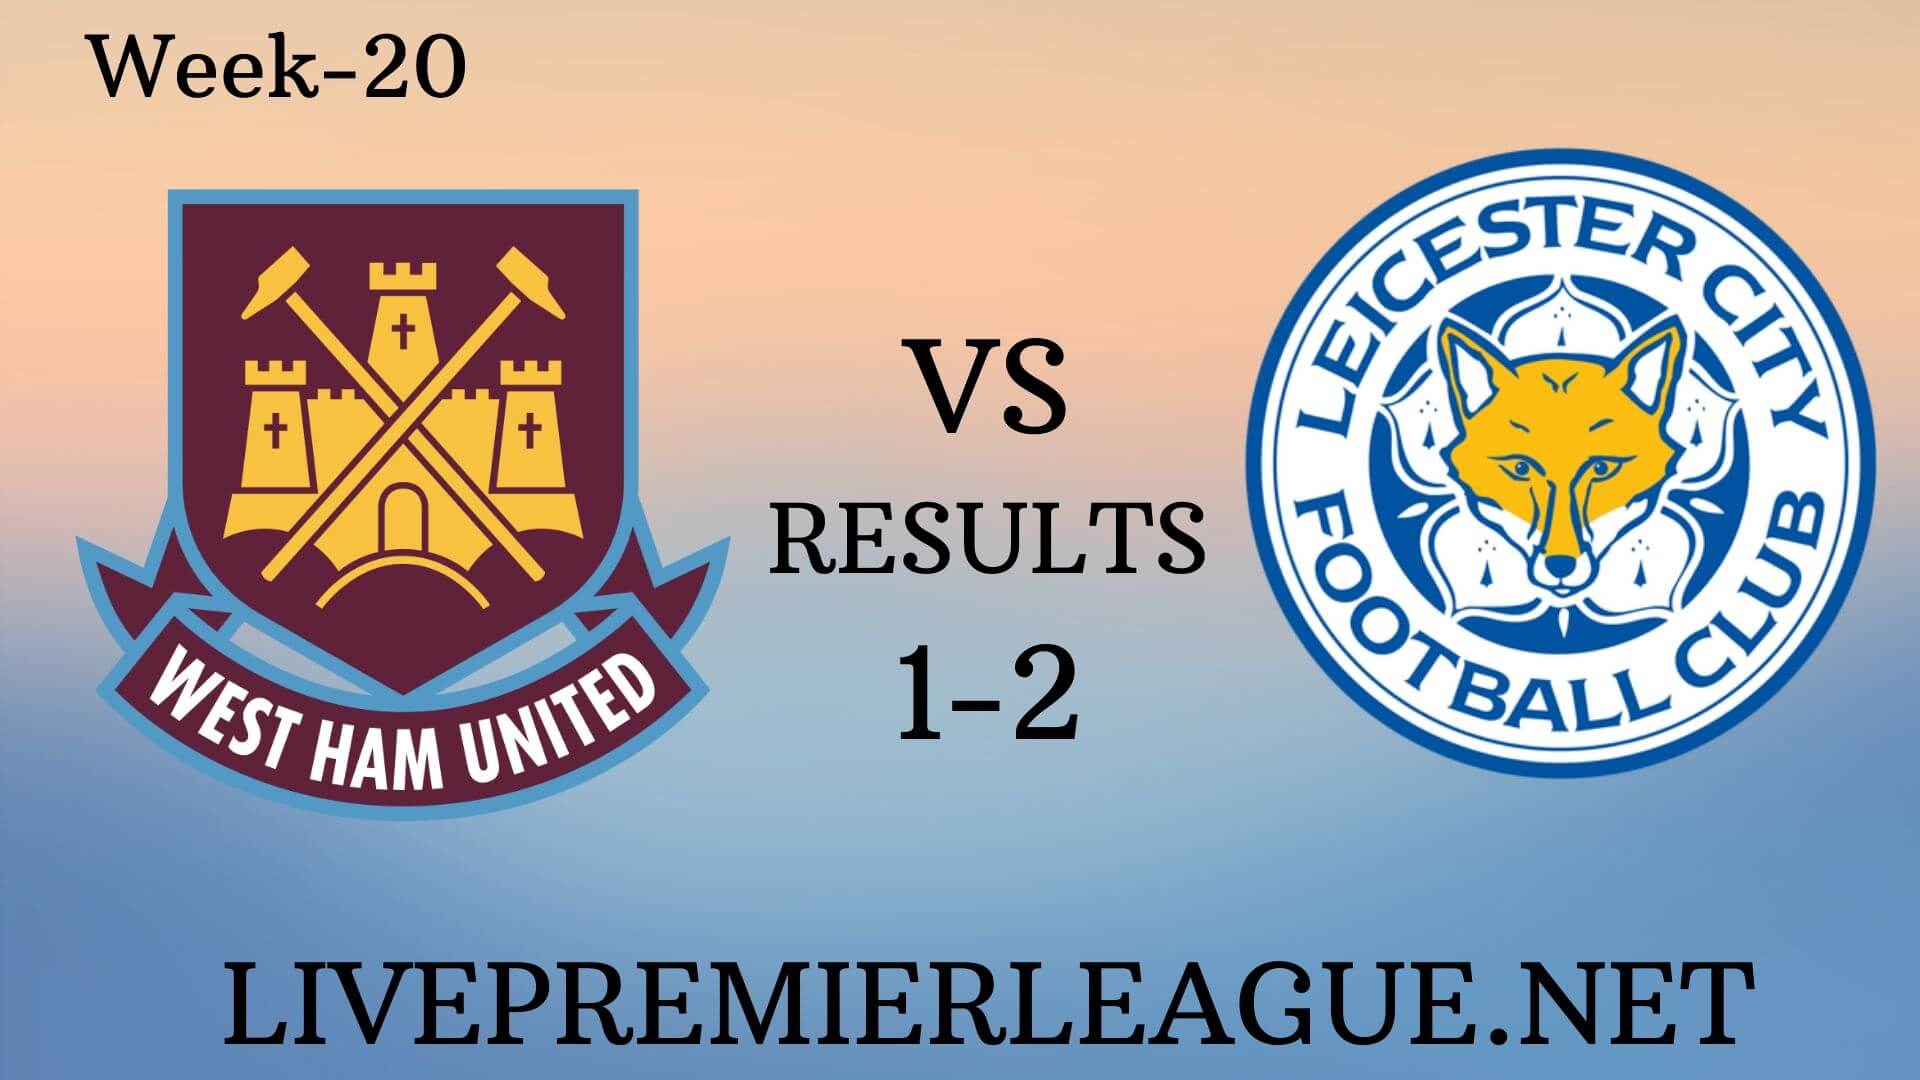 West Ham United Vs Leicester City | Week 20 Results 2019